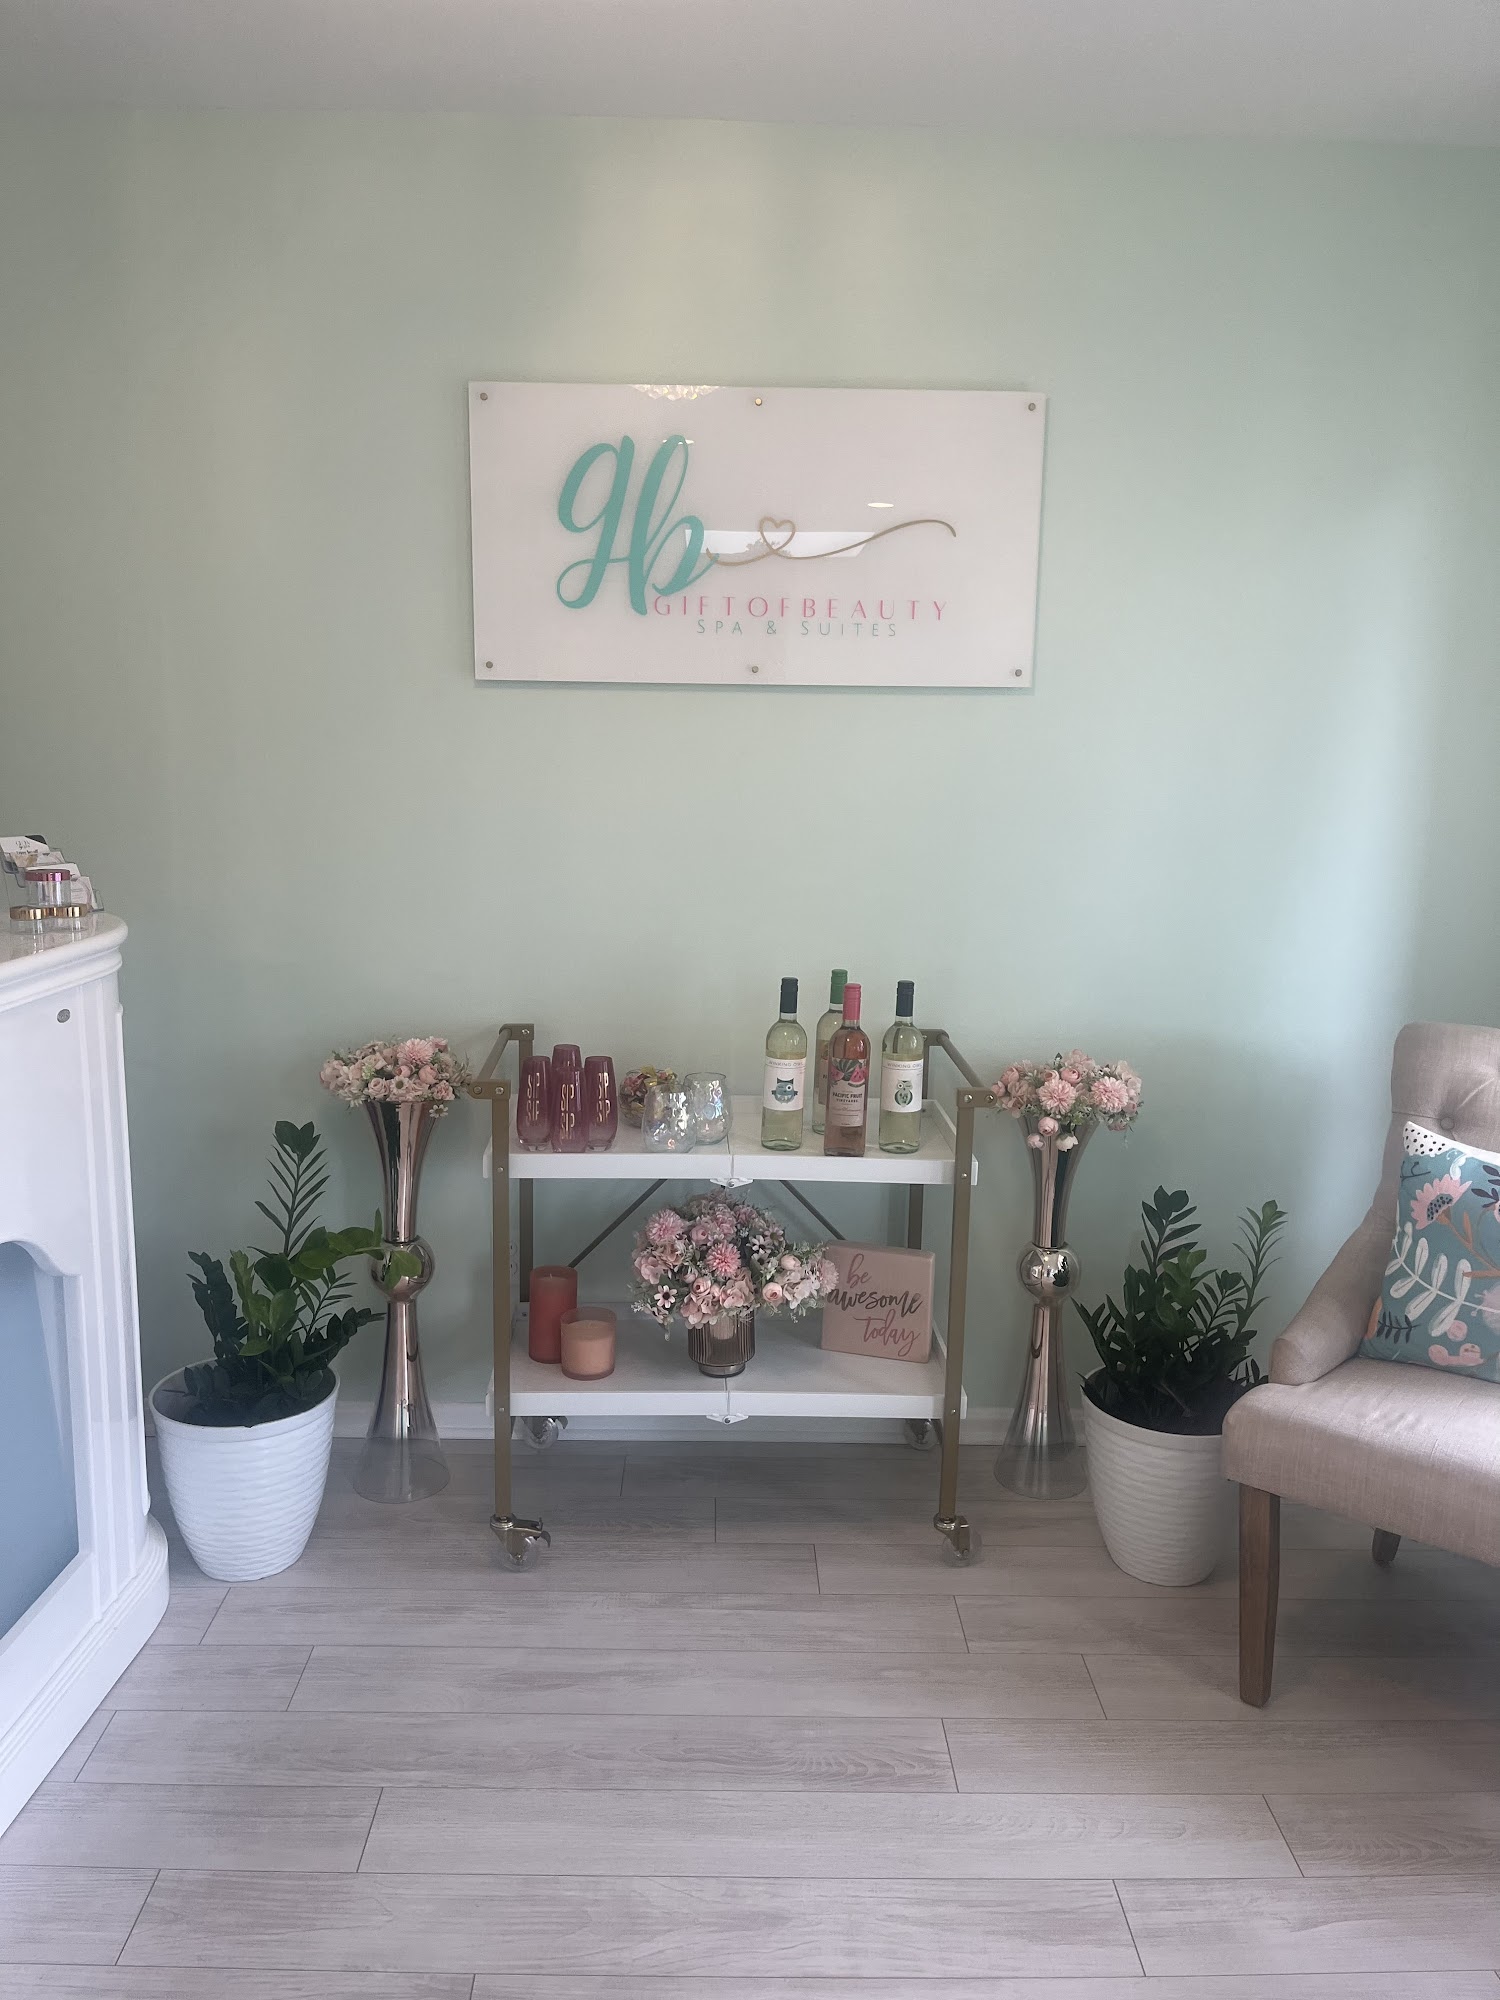 Giftofbeauty Spa & Suites